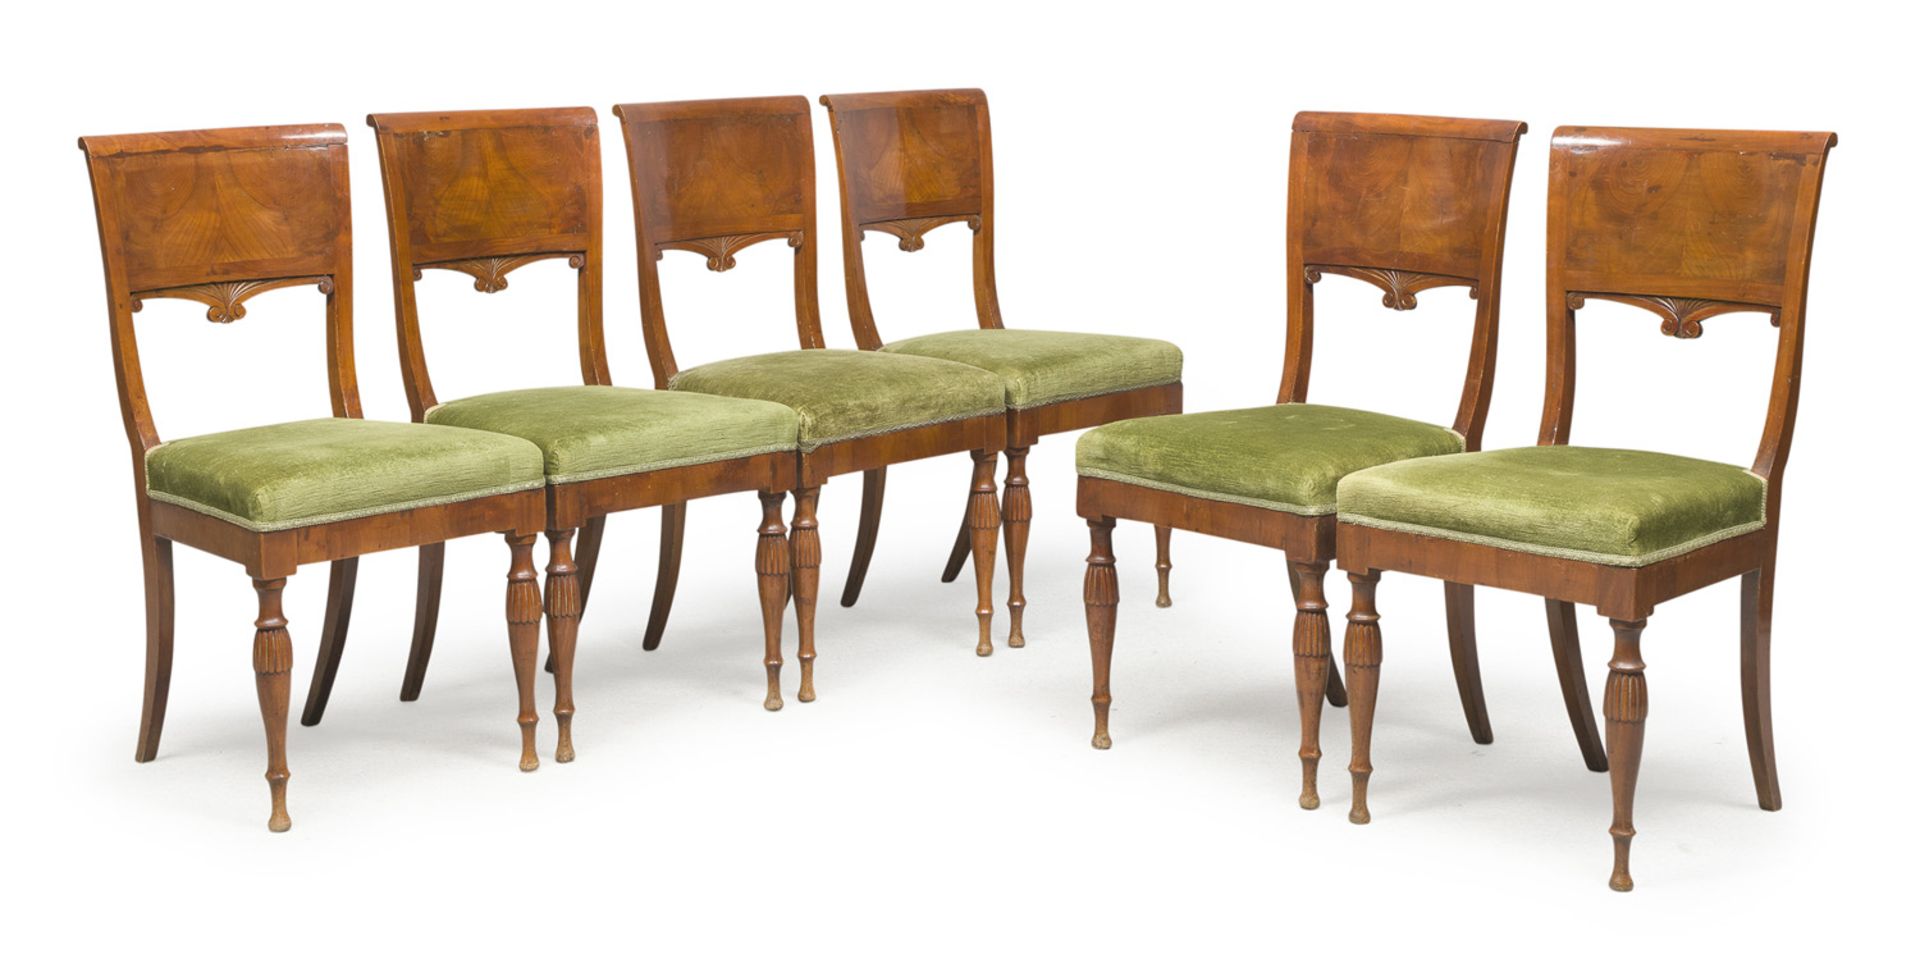 SIX CHAIRS IN CHERRY PROBABLY TUSCANY EARLY 19TH CENTURY